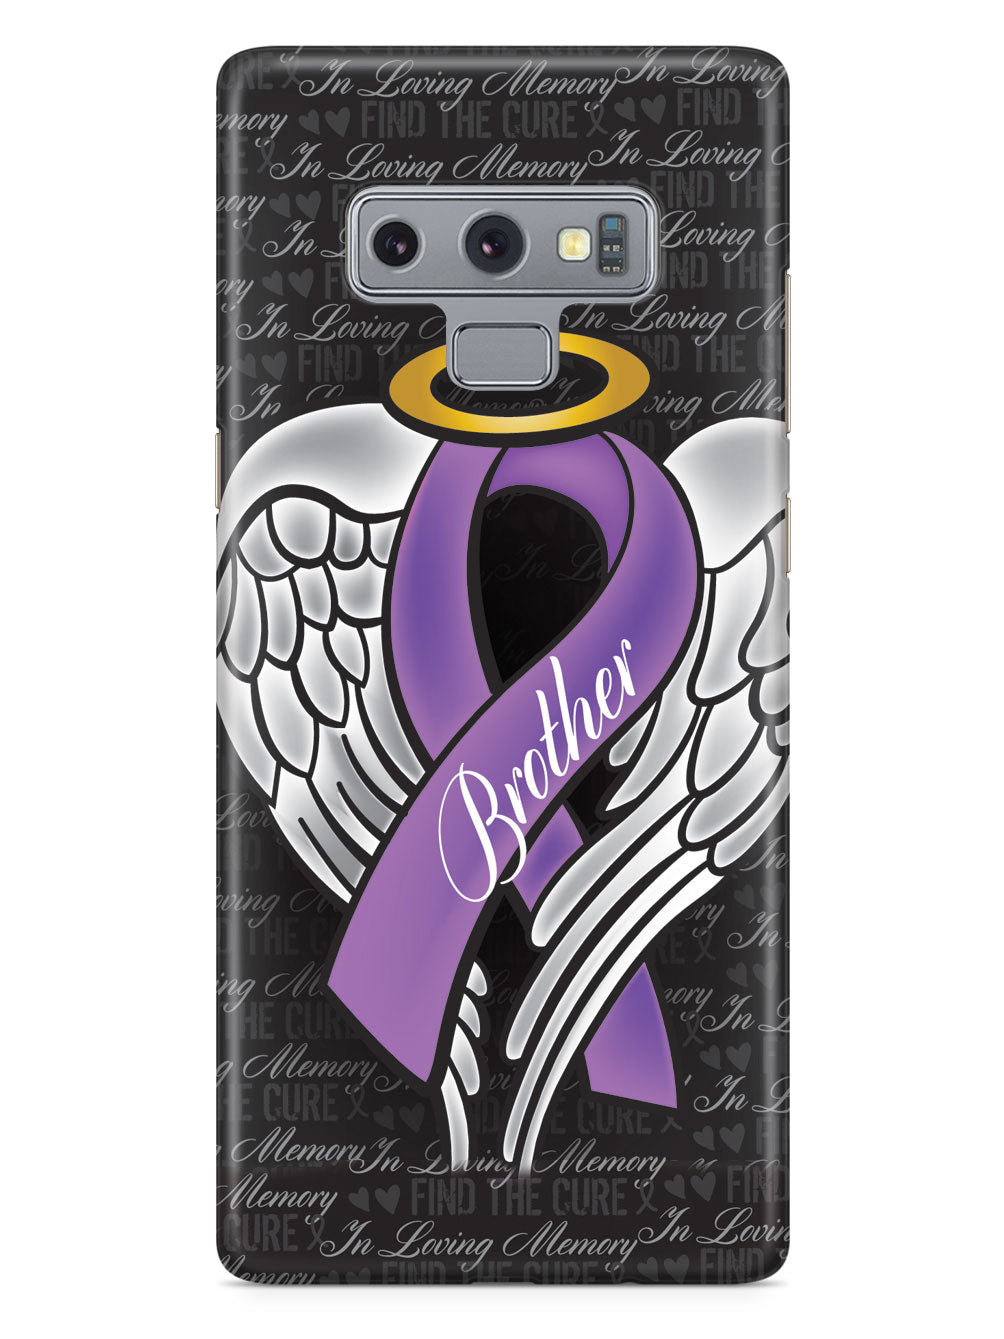 In Loving Memory of My Brother - Purple Ribbon Case